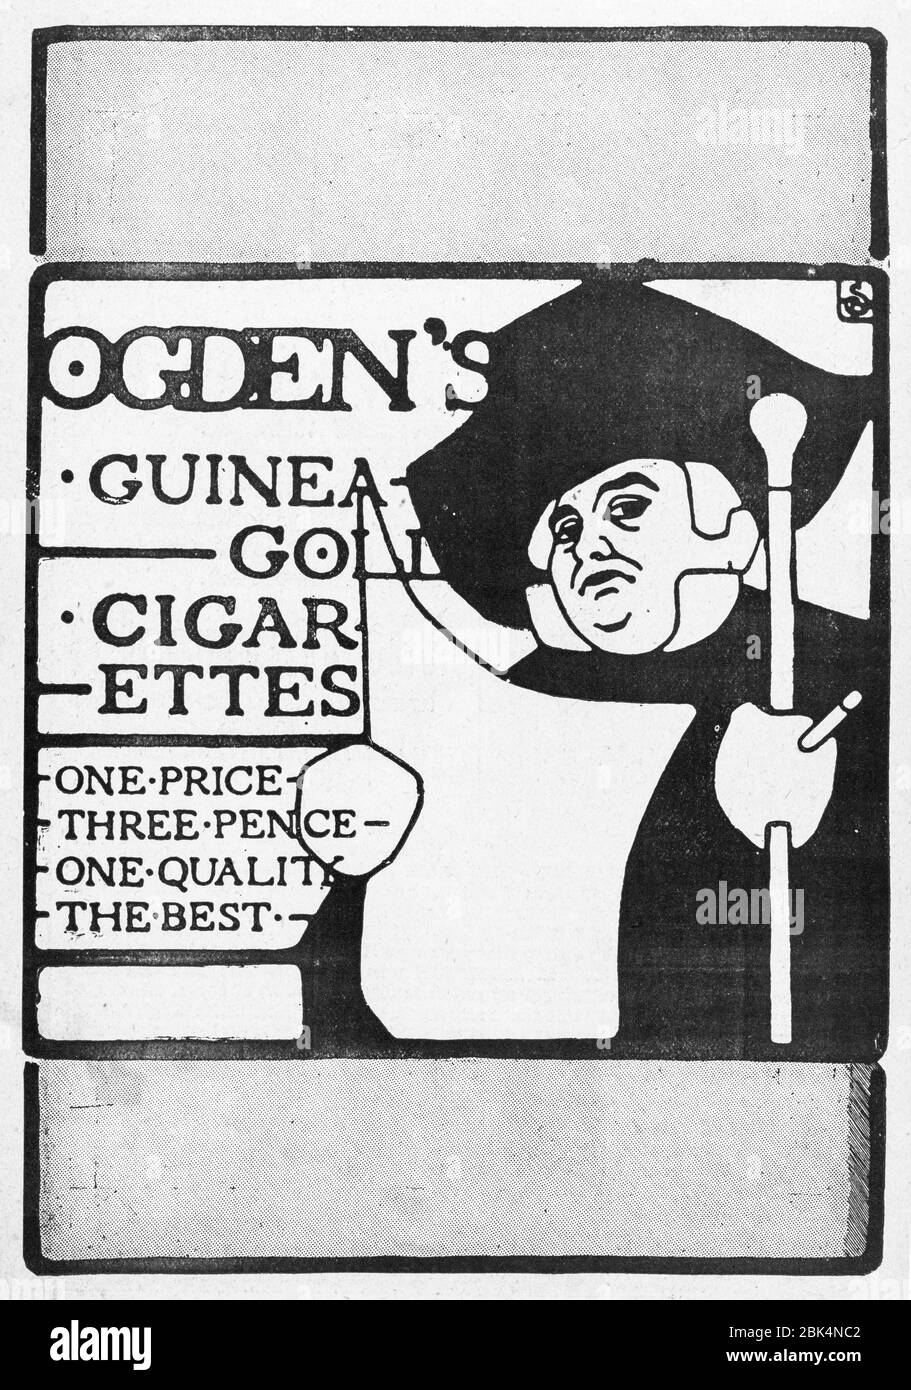 Old vintage tobacco / cigarette / smoking advert from early 1900's, before dawn of advertising standards. History of advertising, old tobacco adverts. Stock Photo